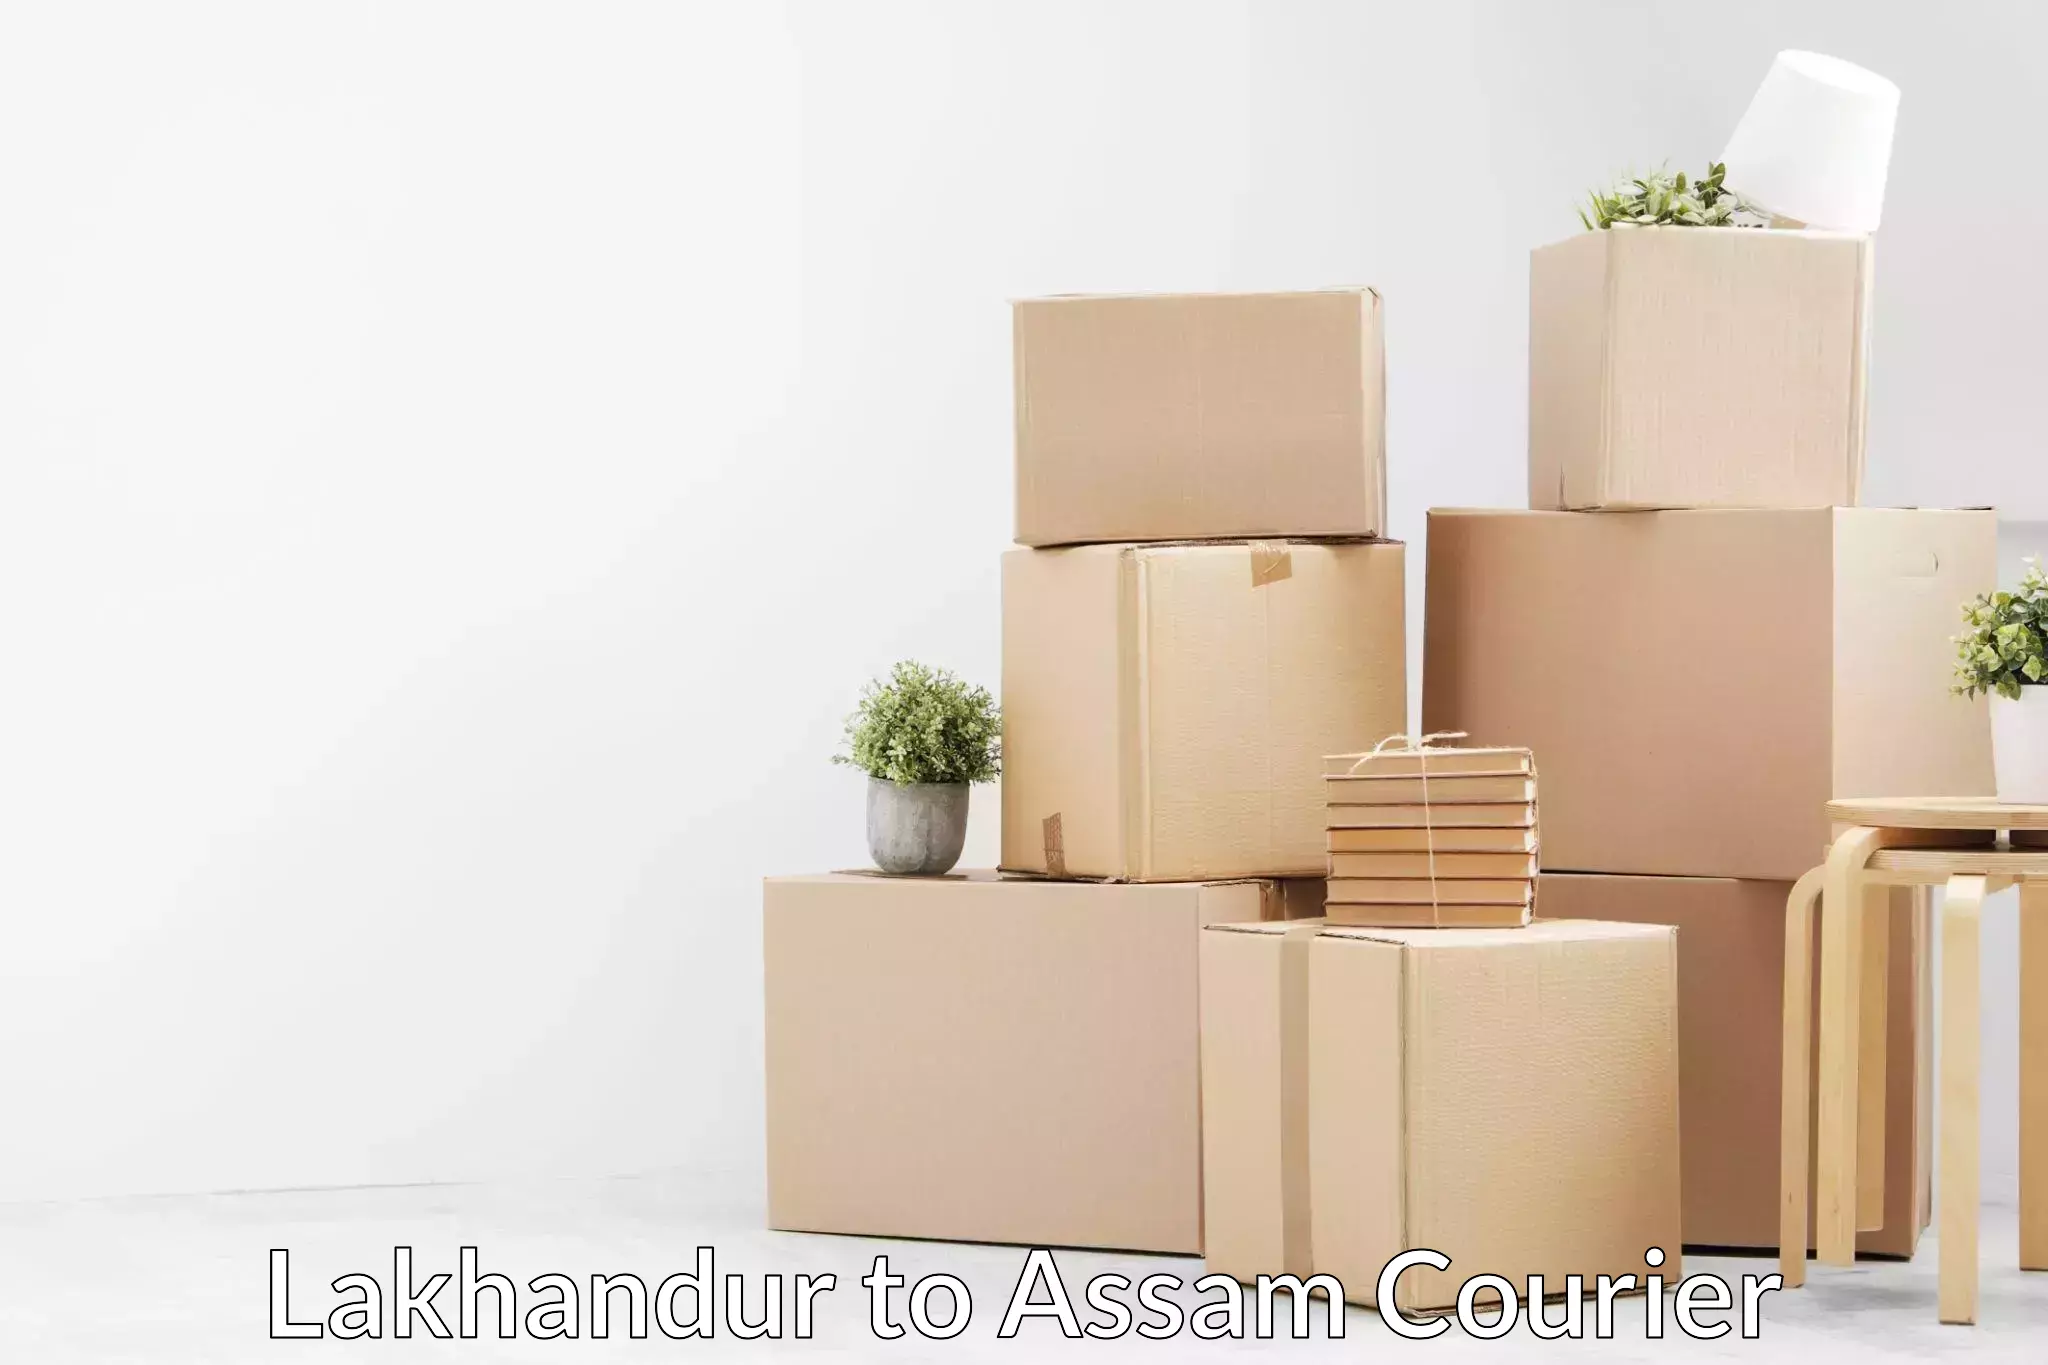 Moving and packing experts Lakhandur to Dotma